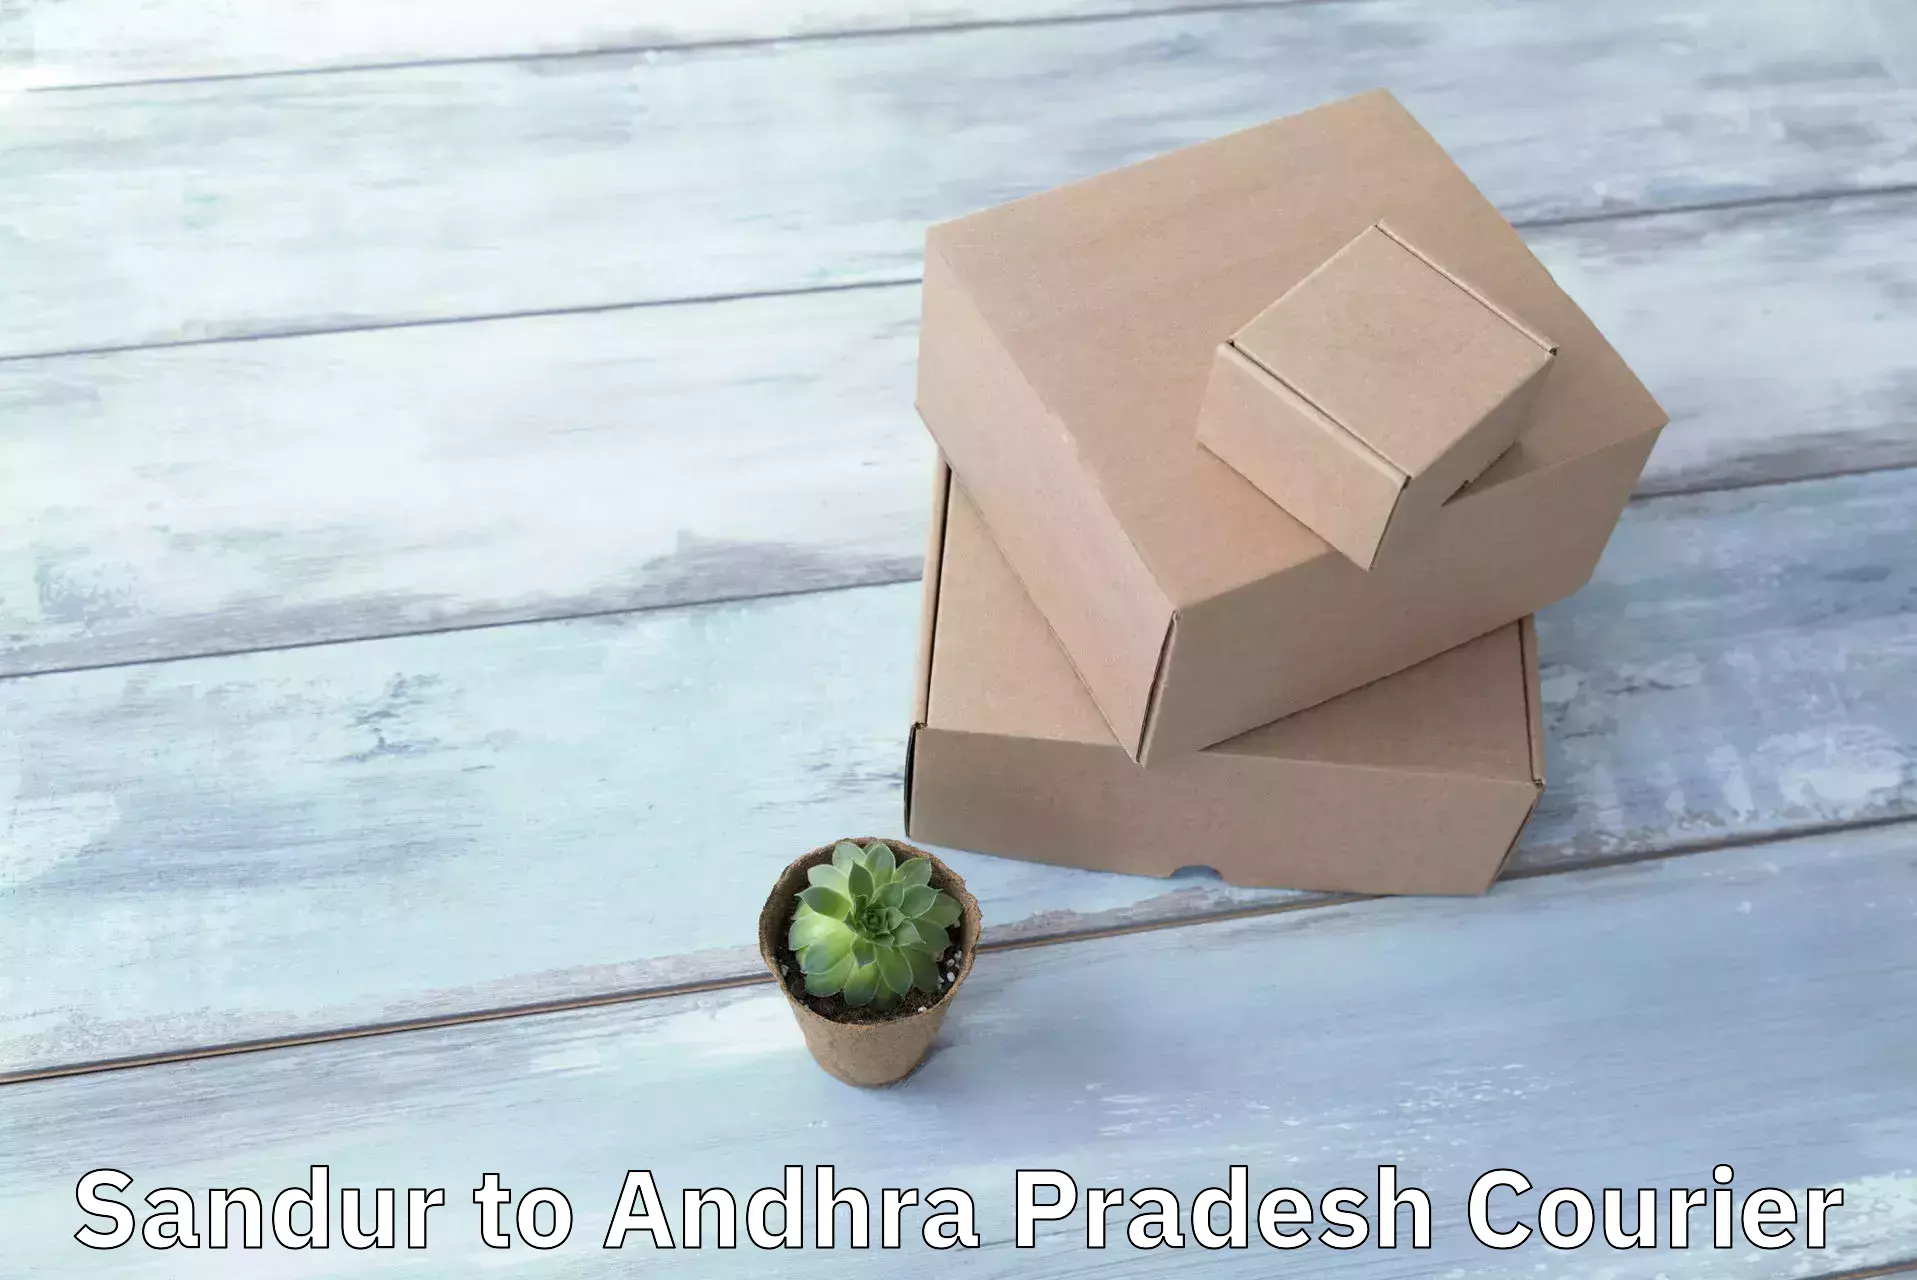 Easy access courier services Sandur to Andhra Pradesh